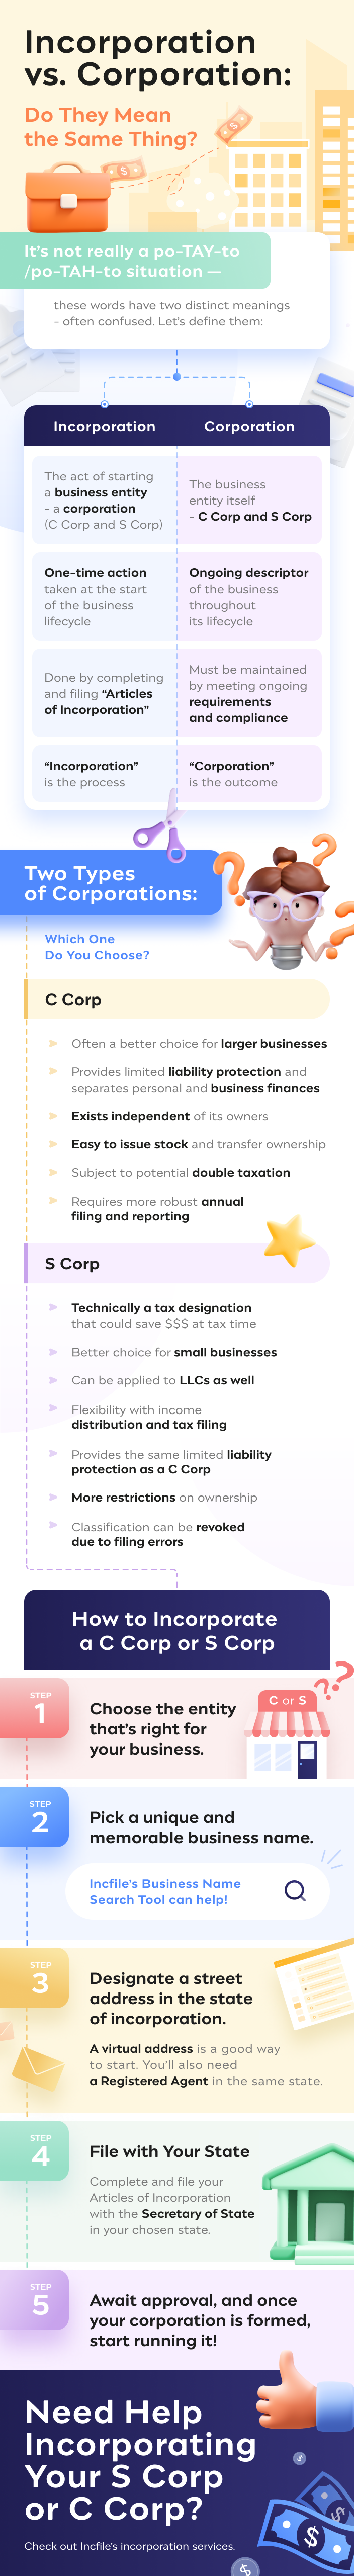 incorporation vs corporation meanings